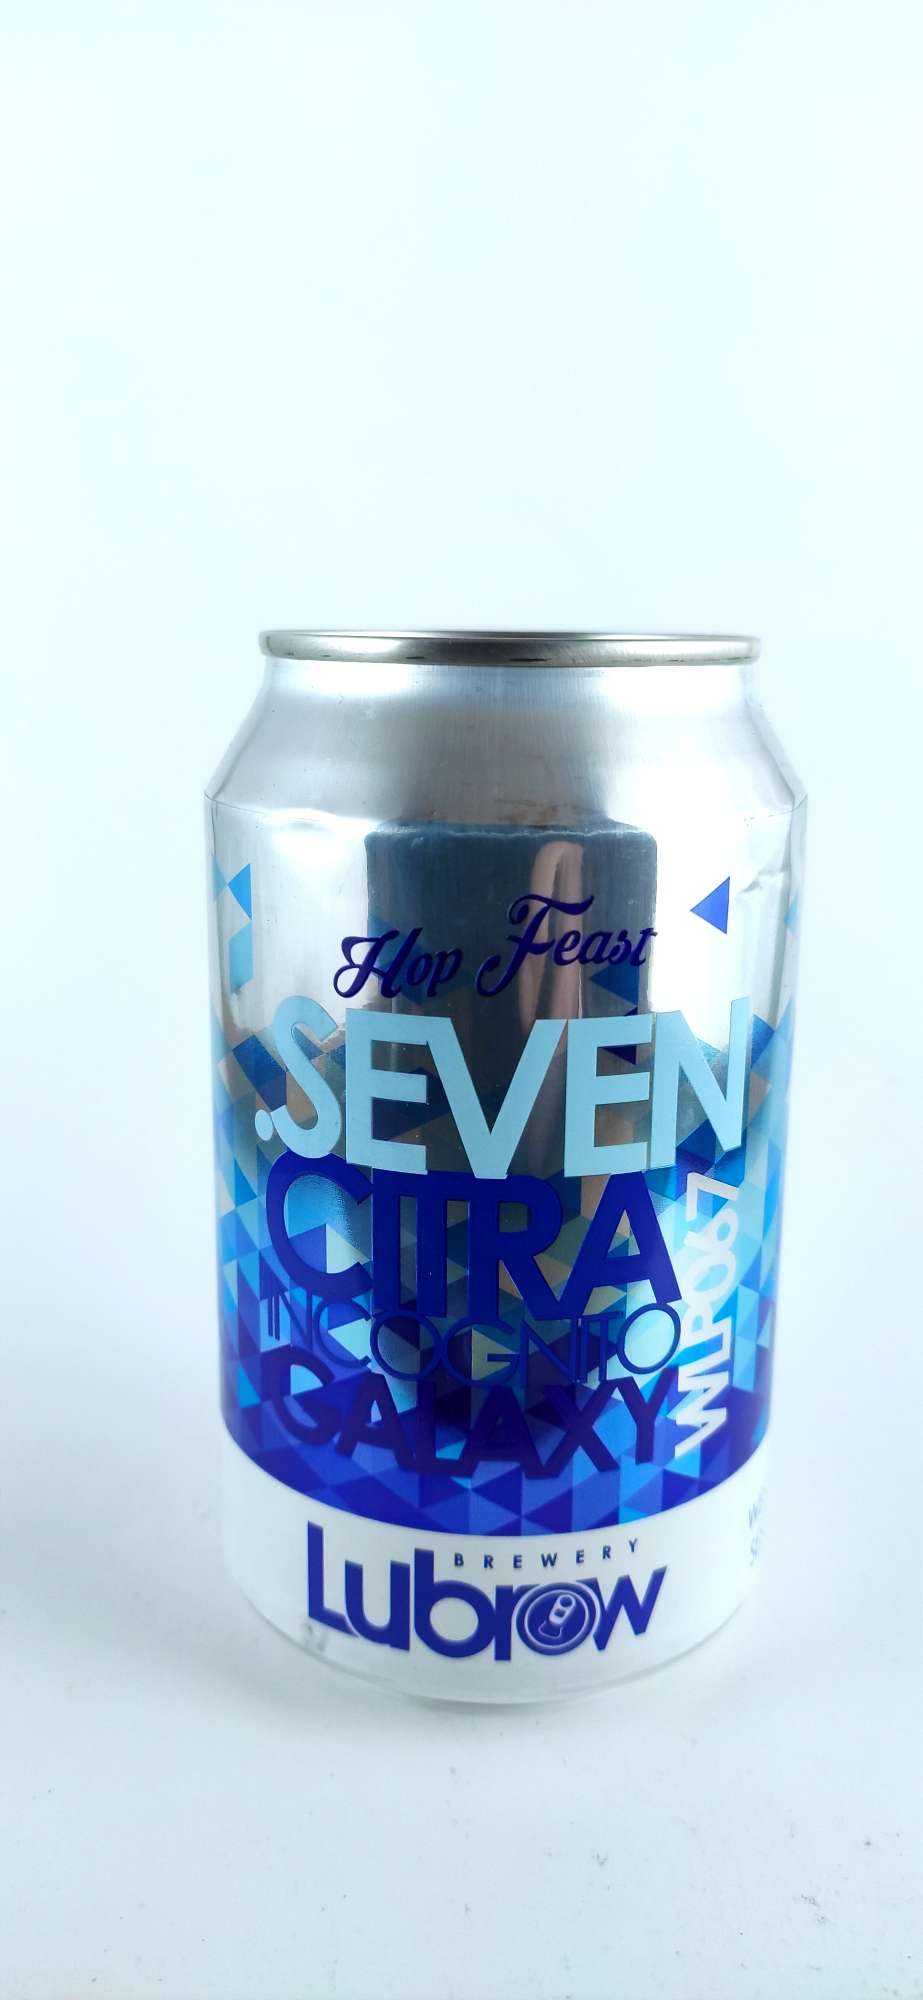 Lubrow Hop Feast.SEVEN Session IPA